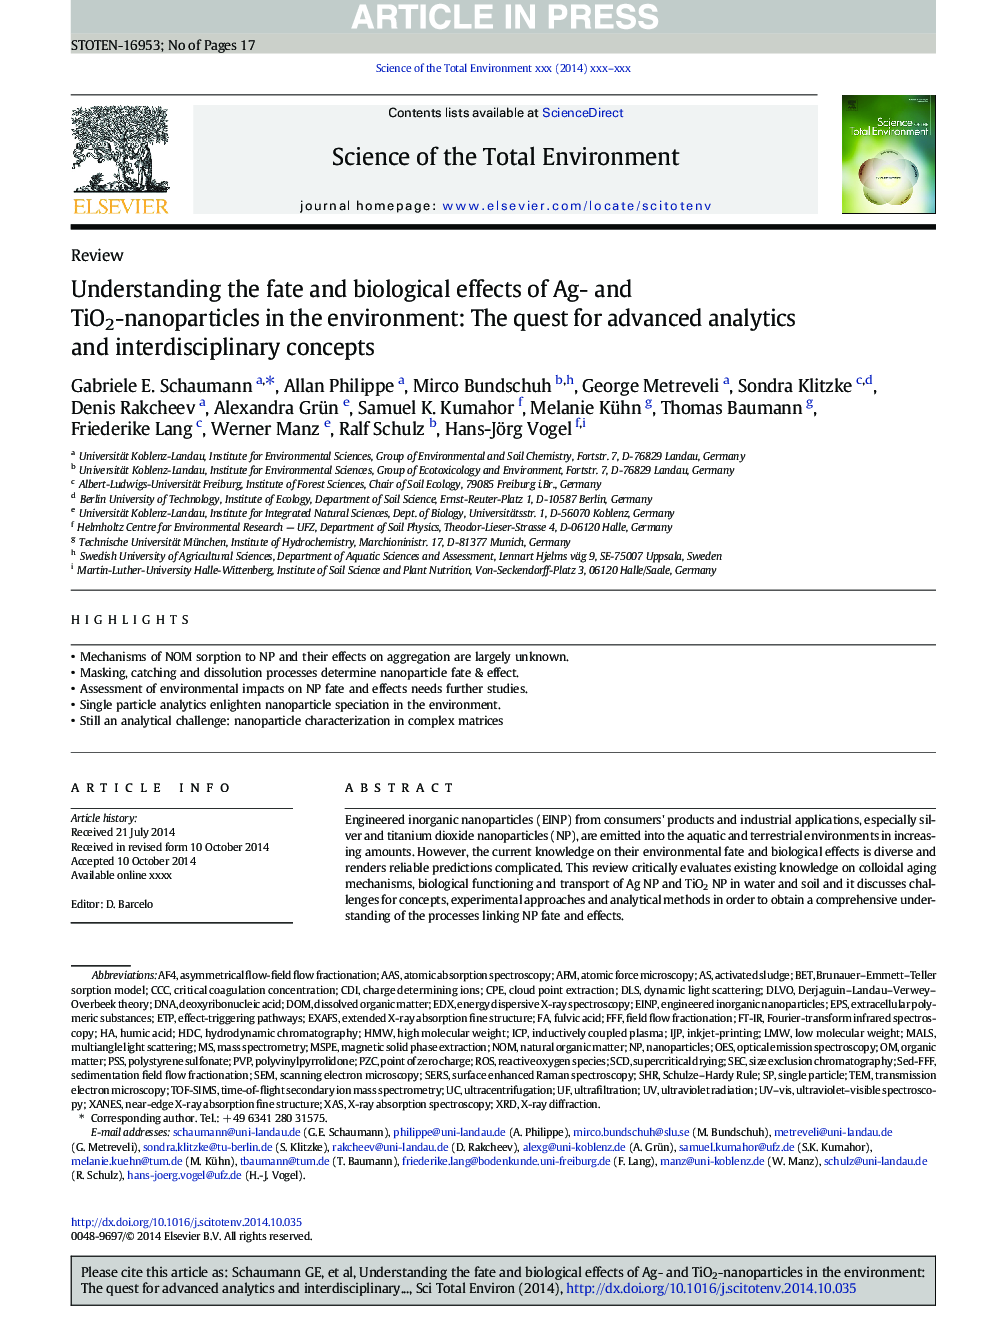 Understanding the fate and biological effects of Ag- and TiO2-nanoparticles in the environment: The quest for advanced analytics and interdisciplinary concepts